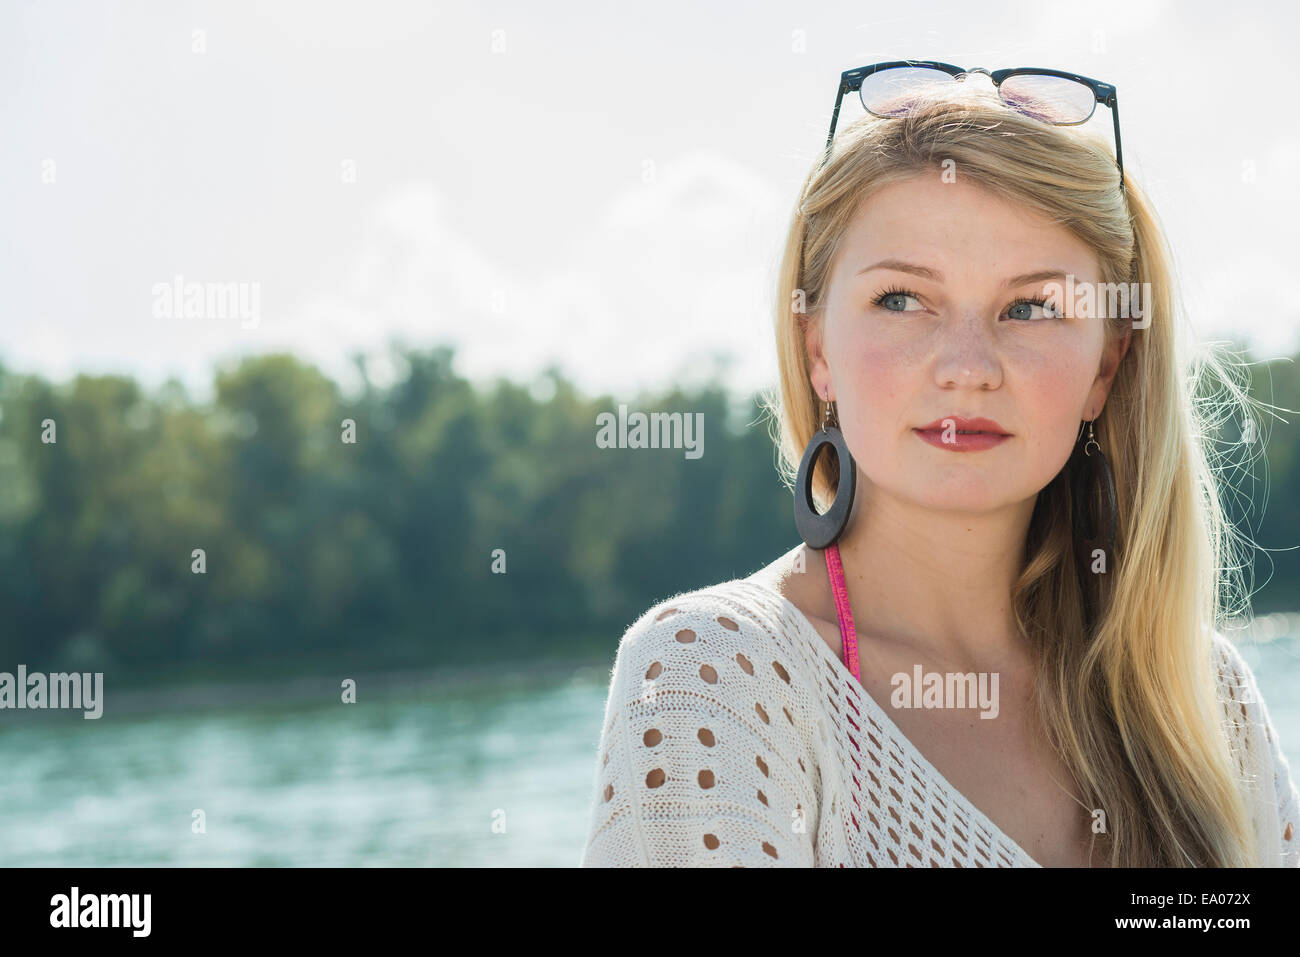 Young woman with long blonde hair looking away, portrait Stock Photo